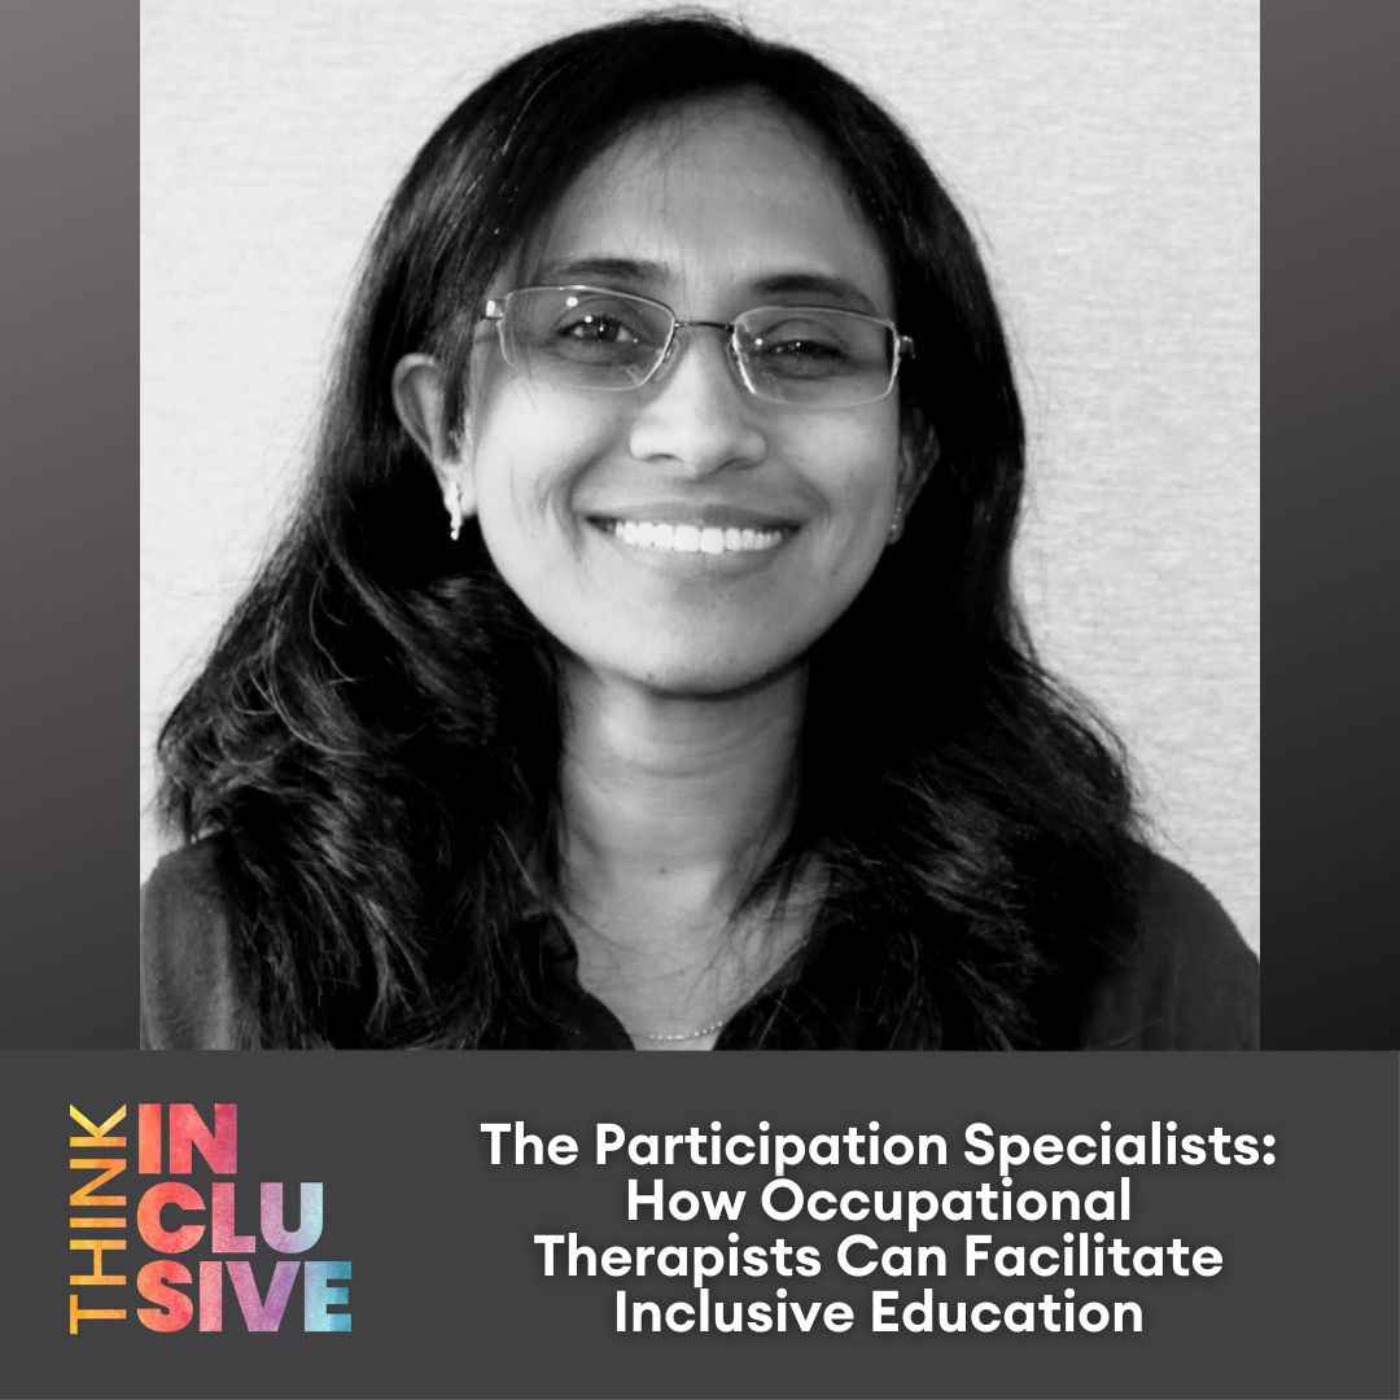 The Participation Specialists: How Occupational Therapists Can Facilitate Inclusive Education